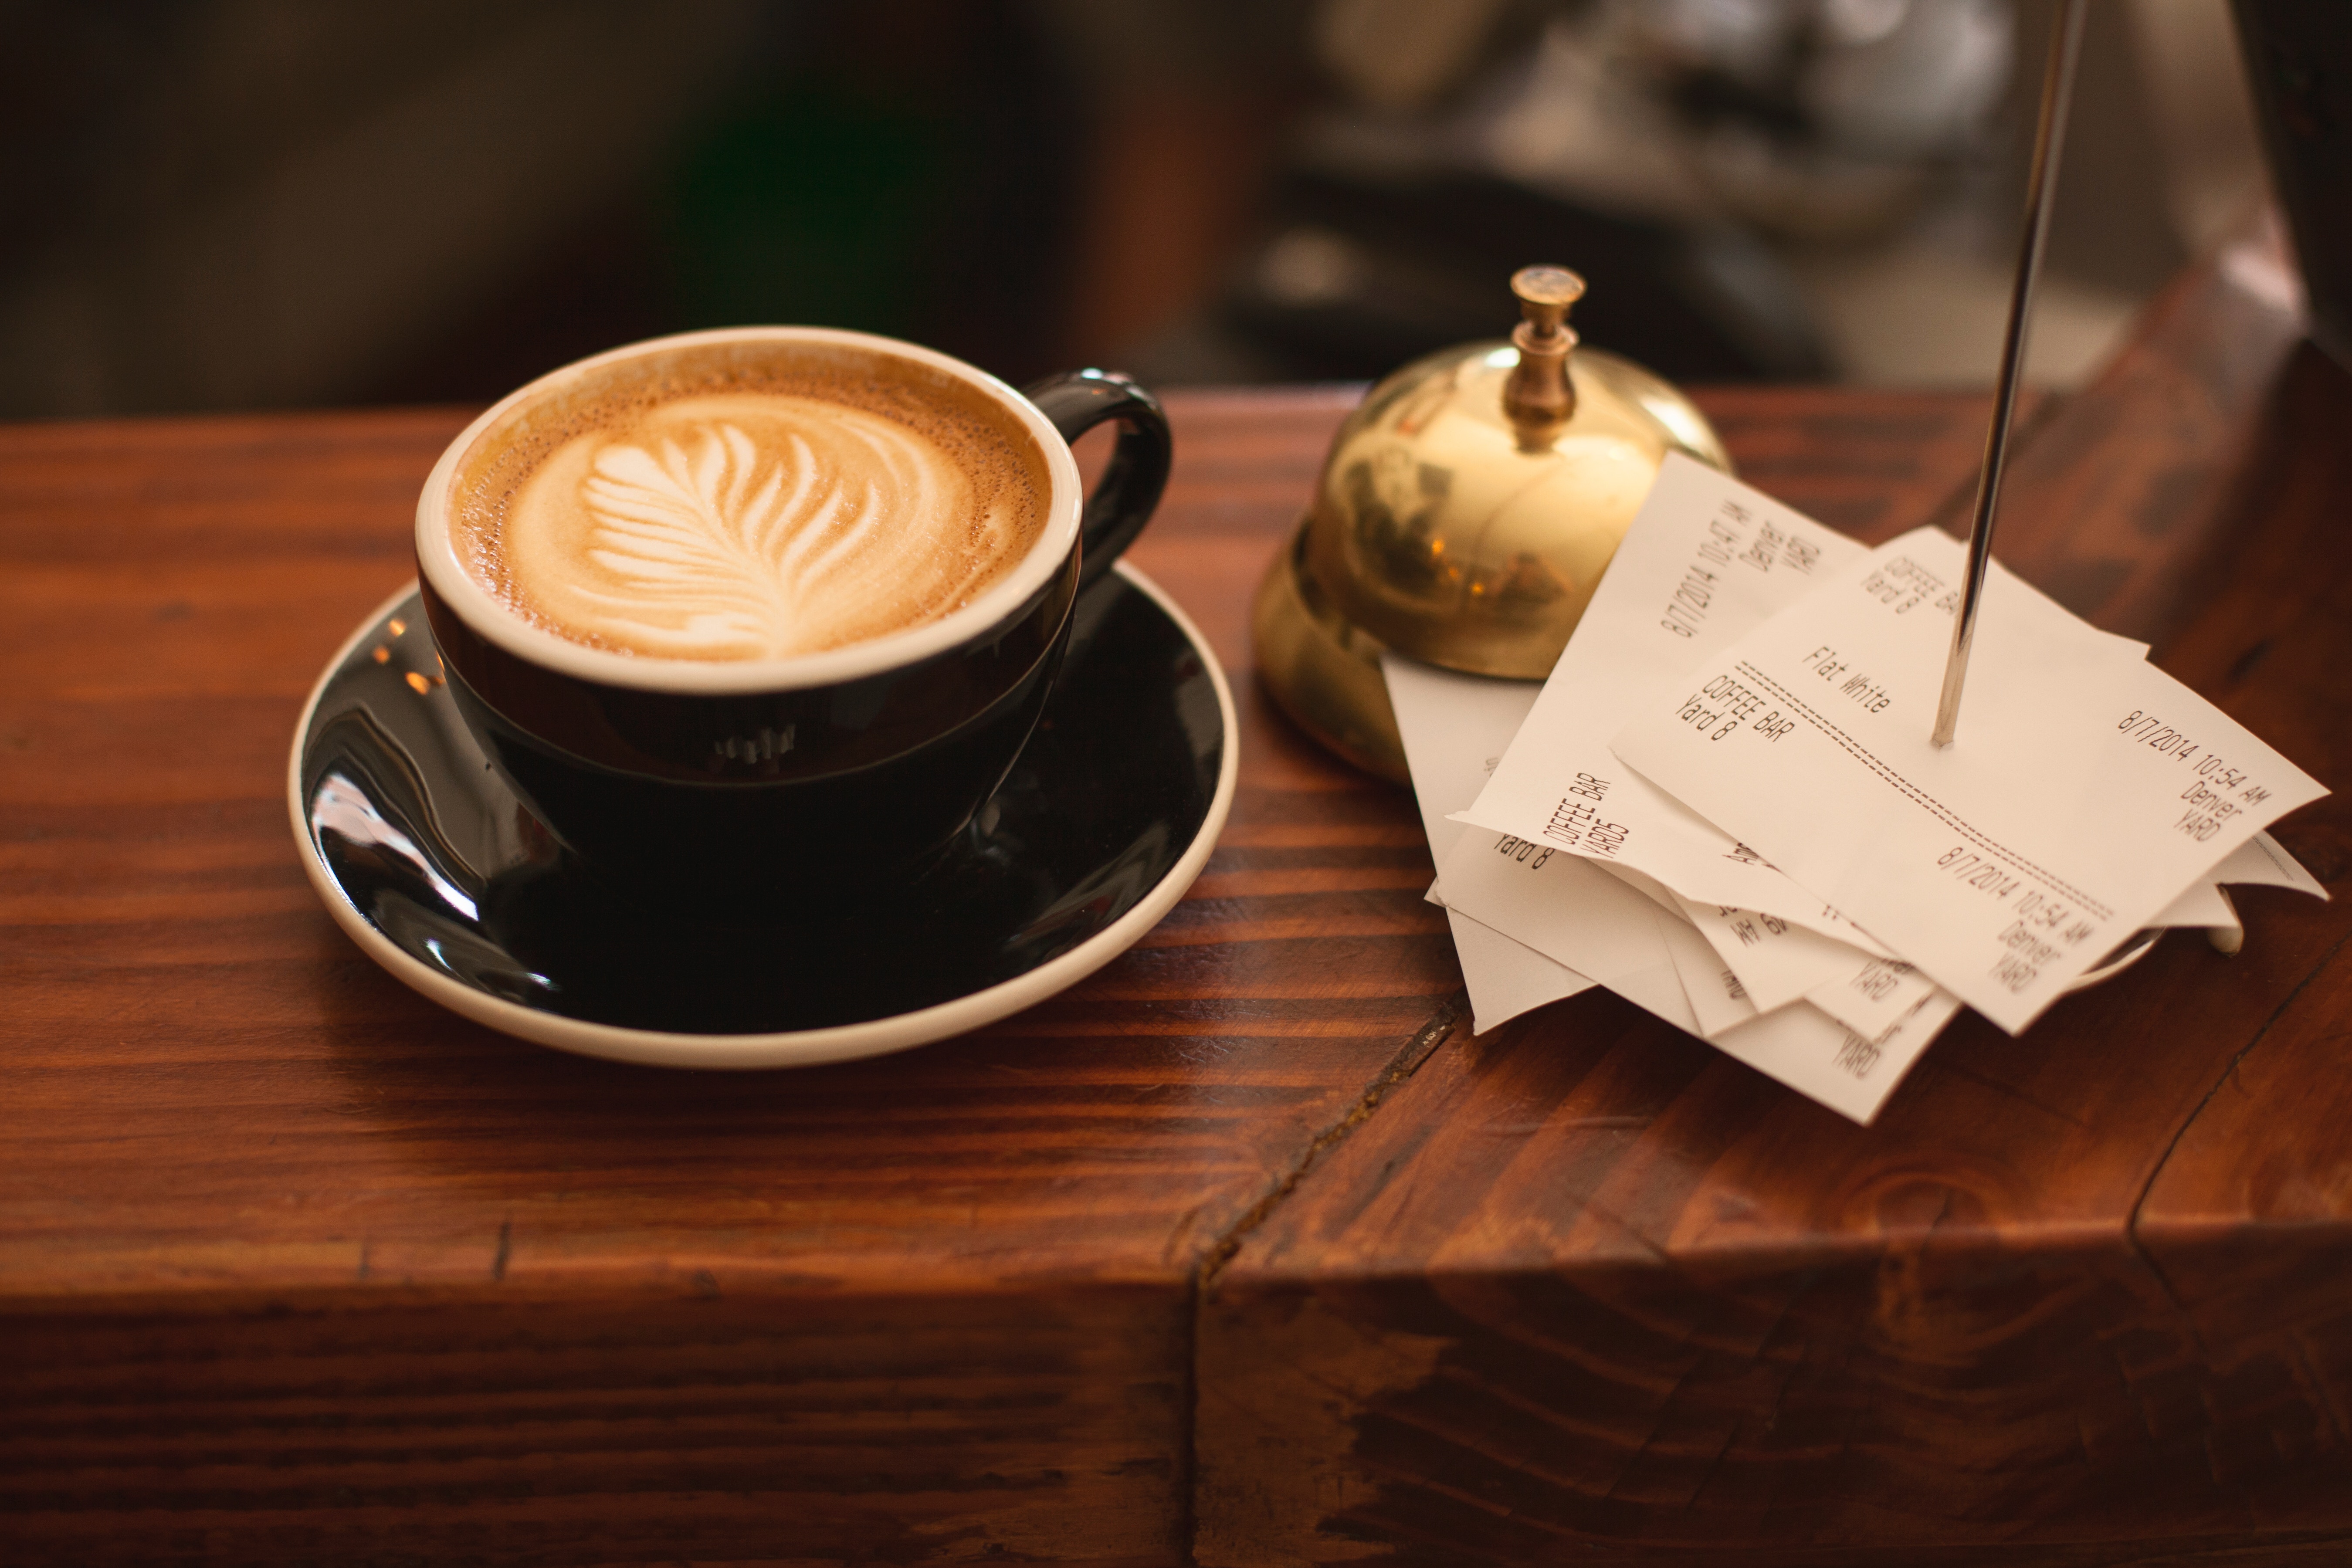 Cup of coffee on a table next to a stack of coffee shop receipts and a service bell